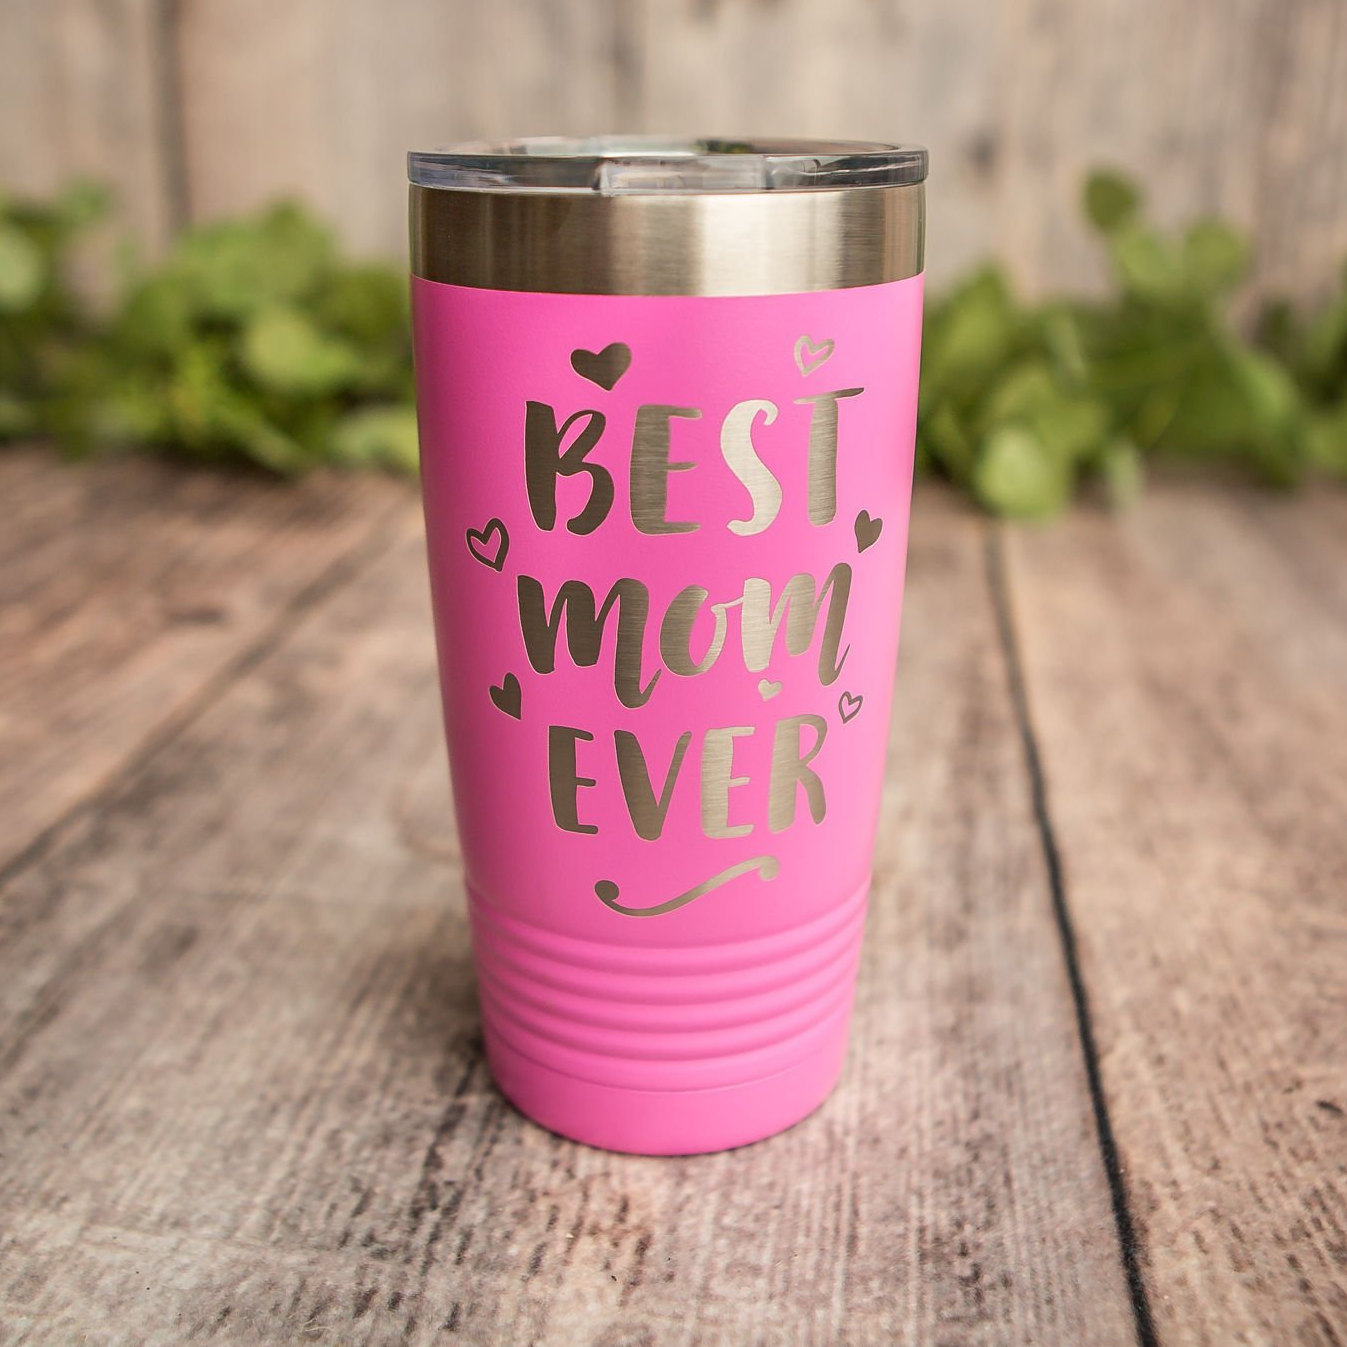 https://3cetching.com/wp-content/uploads/2020/09/best-mom-ever-engraved-stainless-steel-tumbler-yeti-style-cup-momlife-cup-5f5fab97.jpg